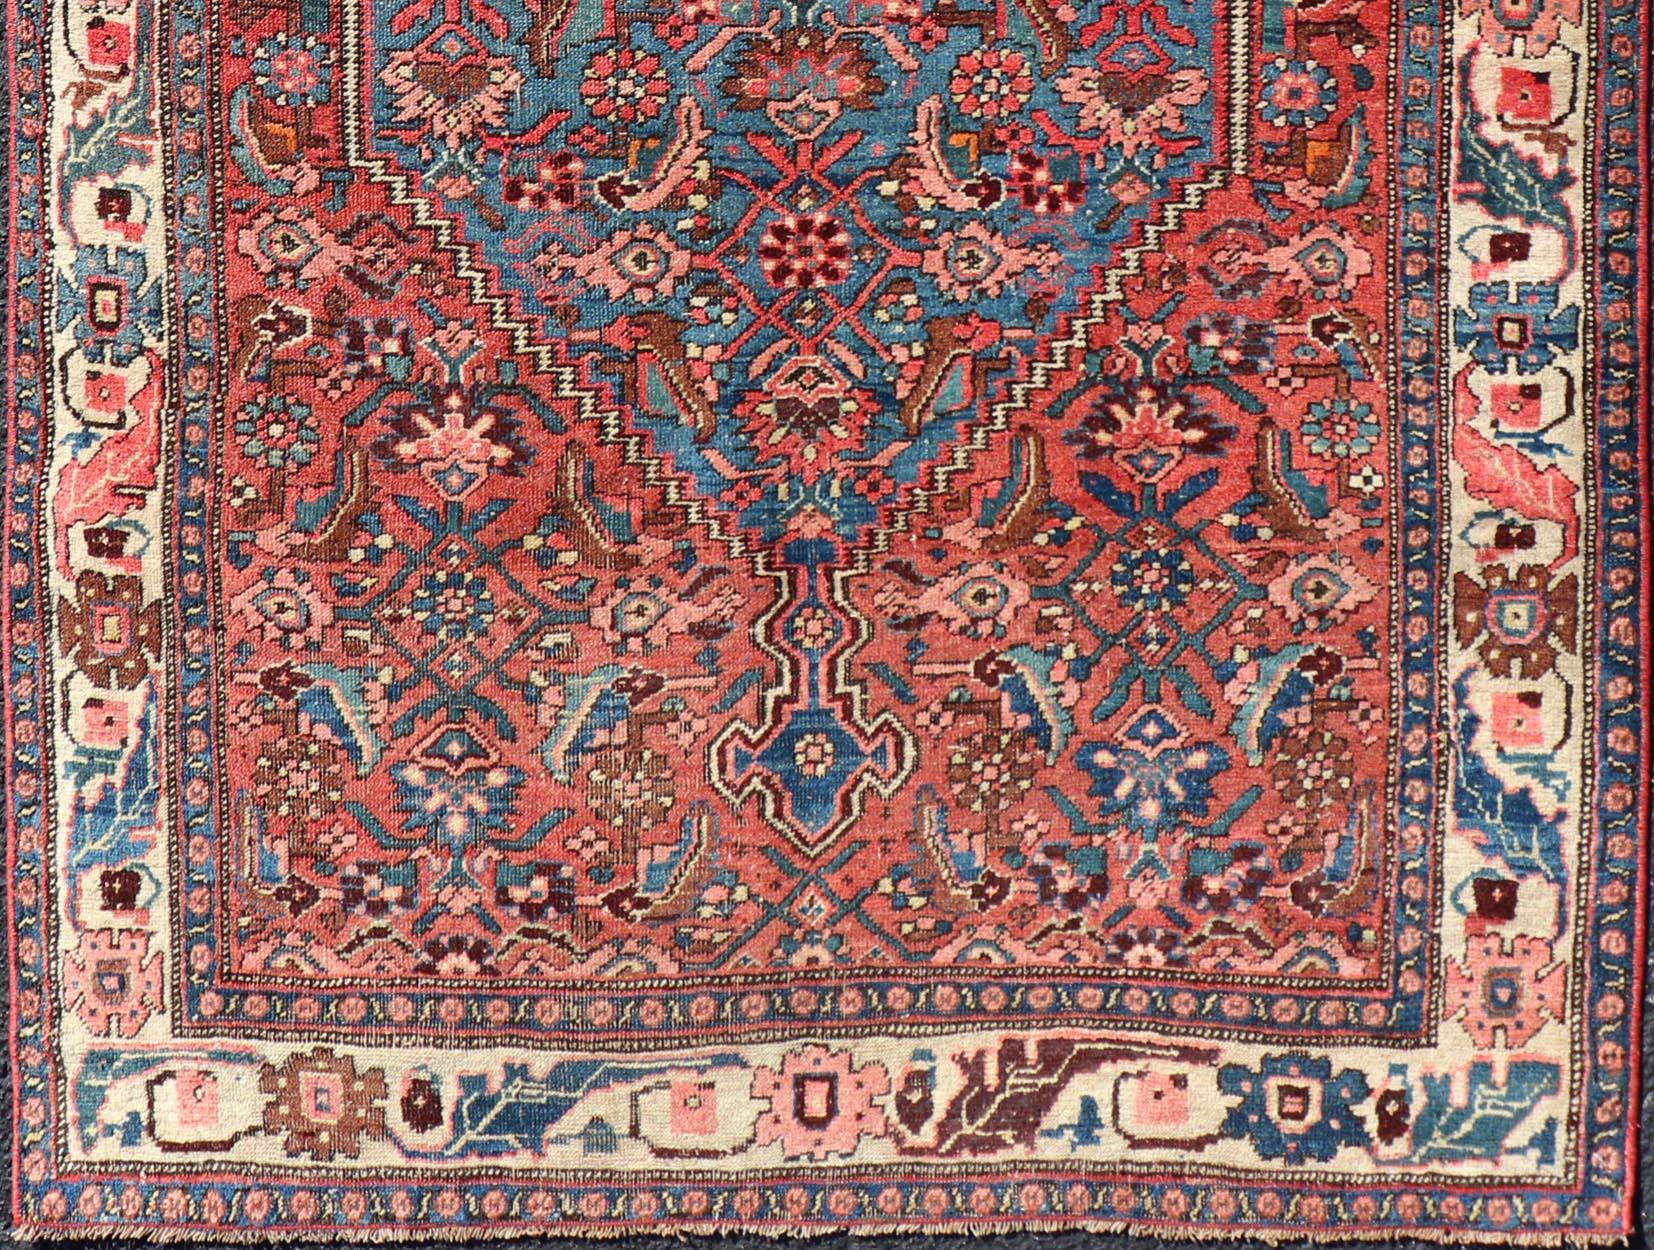 Antique Hand Knotted Bidjar Rug with medallion design in reds and blues. Keivan Woven Arts / rug EMB-9635-P13573, country of origin / type: Persian / Bidjar, circa Early-20th Century.

Measures: 3'3 x 5'3.